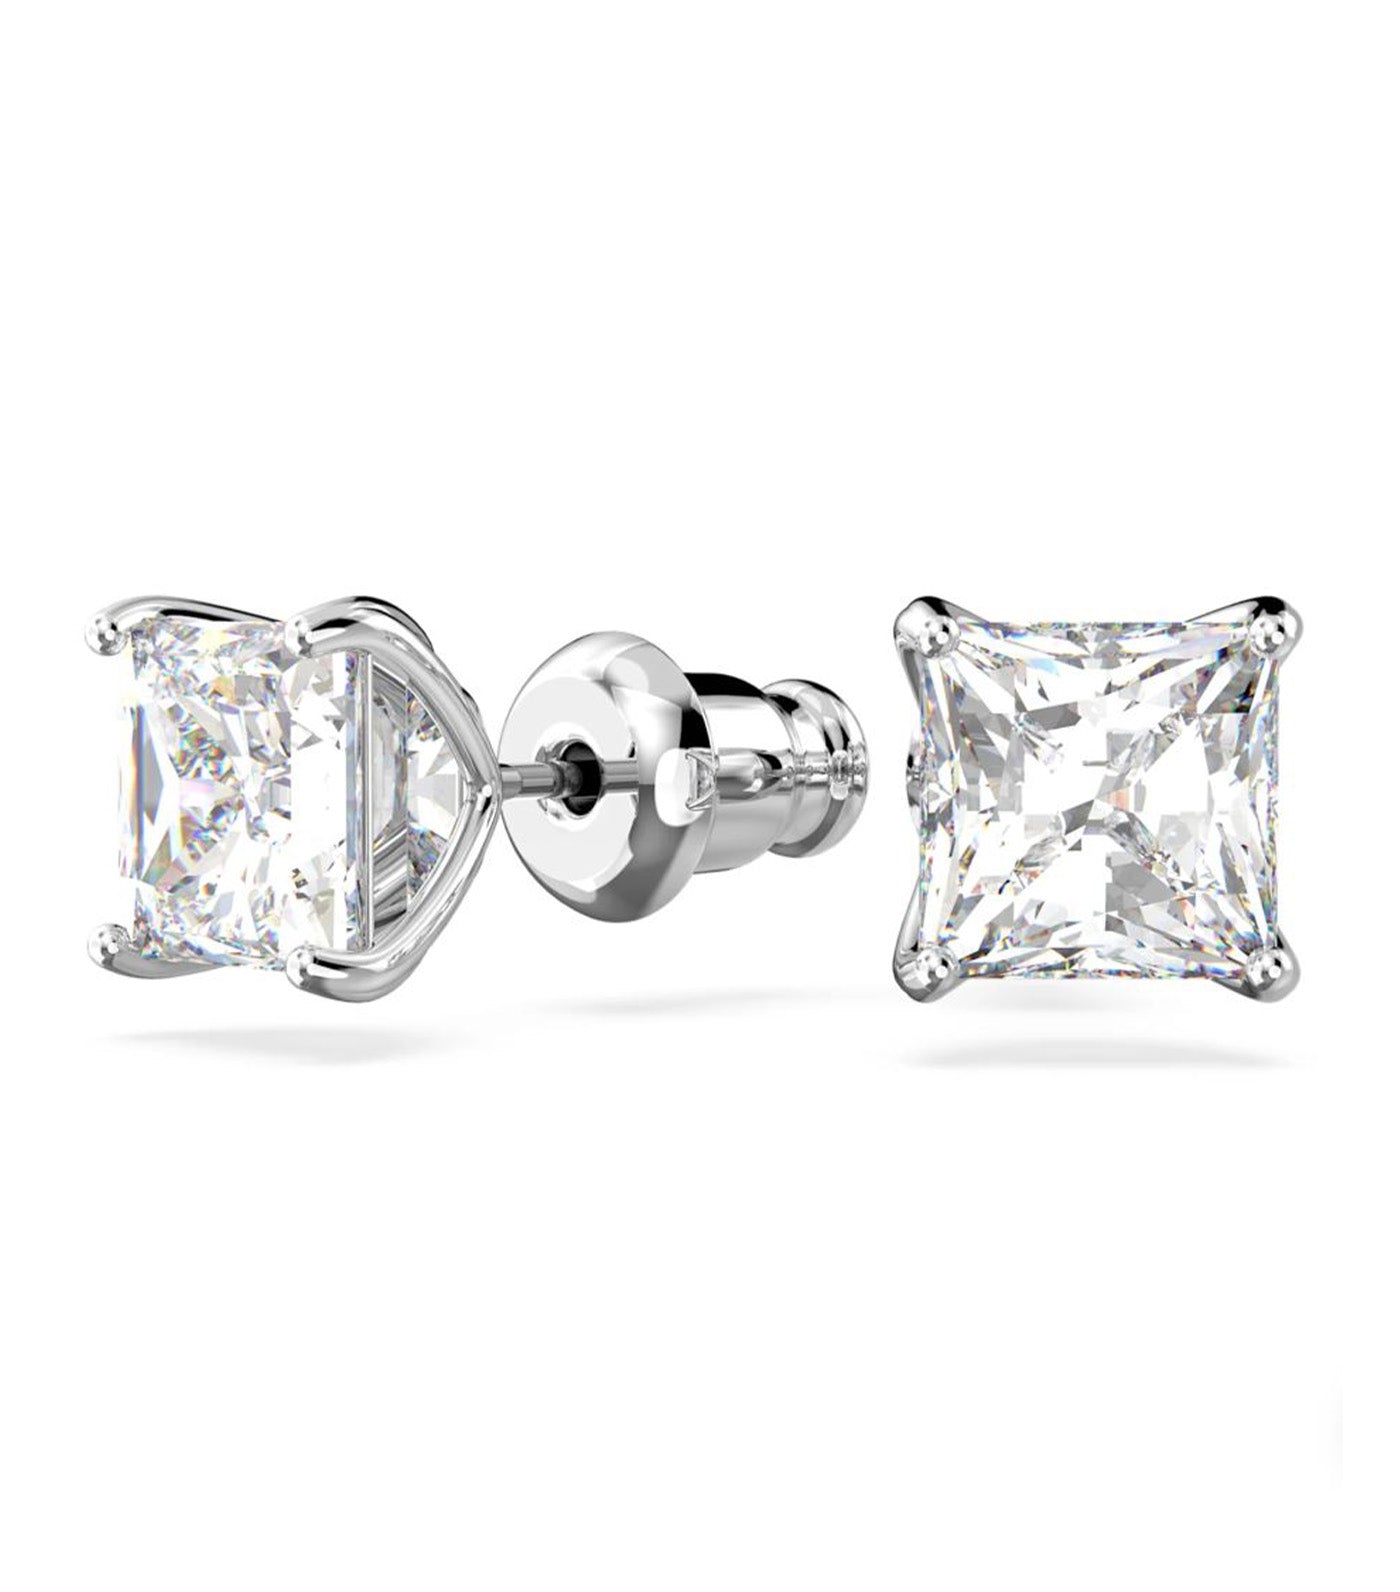 Attract Stud Earrings Square Cut White Rhodium Plated